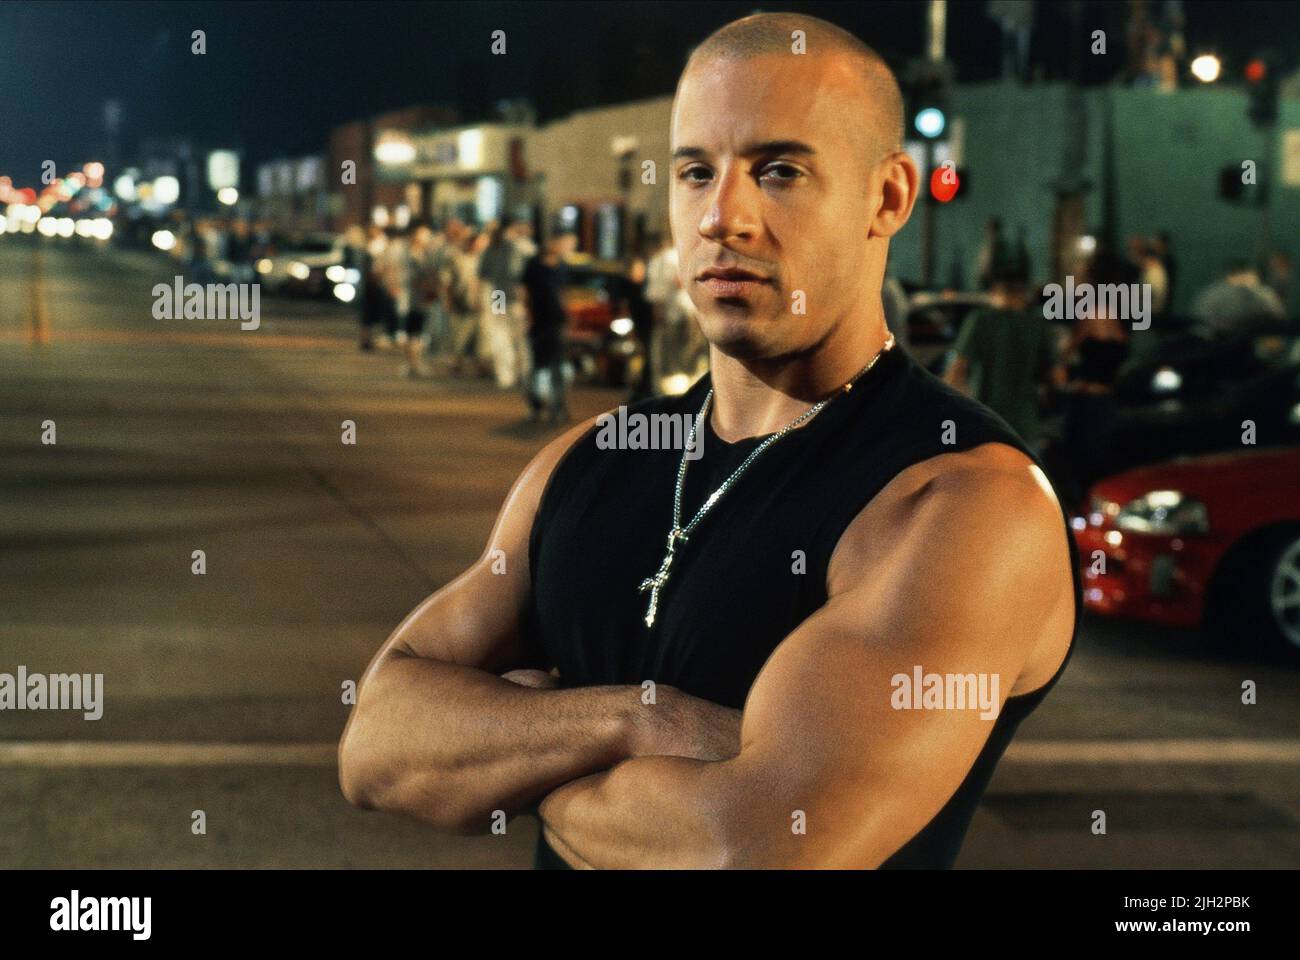 VIN DIESEL, The Fast And The Furious, 2001 Foto Stock